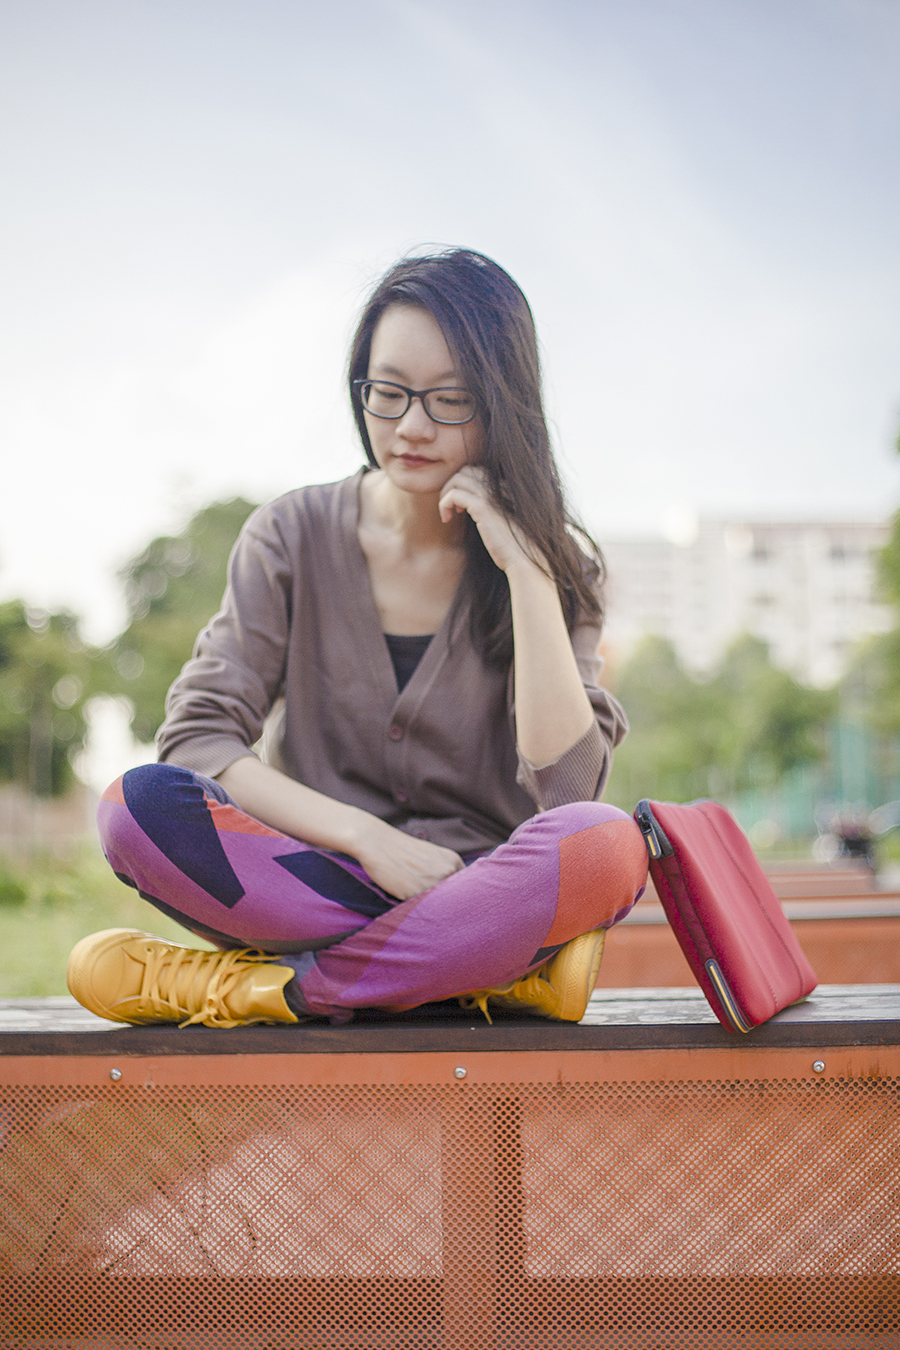 Gap black frame glasses, Targus red laptop sleeve, Uniqlo black bratop camisole, Staples dust boyfriend cardigan, BDG abstract purple jeans from Urban Outfitters, Converse yellow rubber-coated All Stars Chuck Taylors sneakers c/o Shopbop.